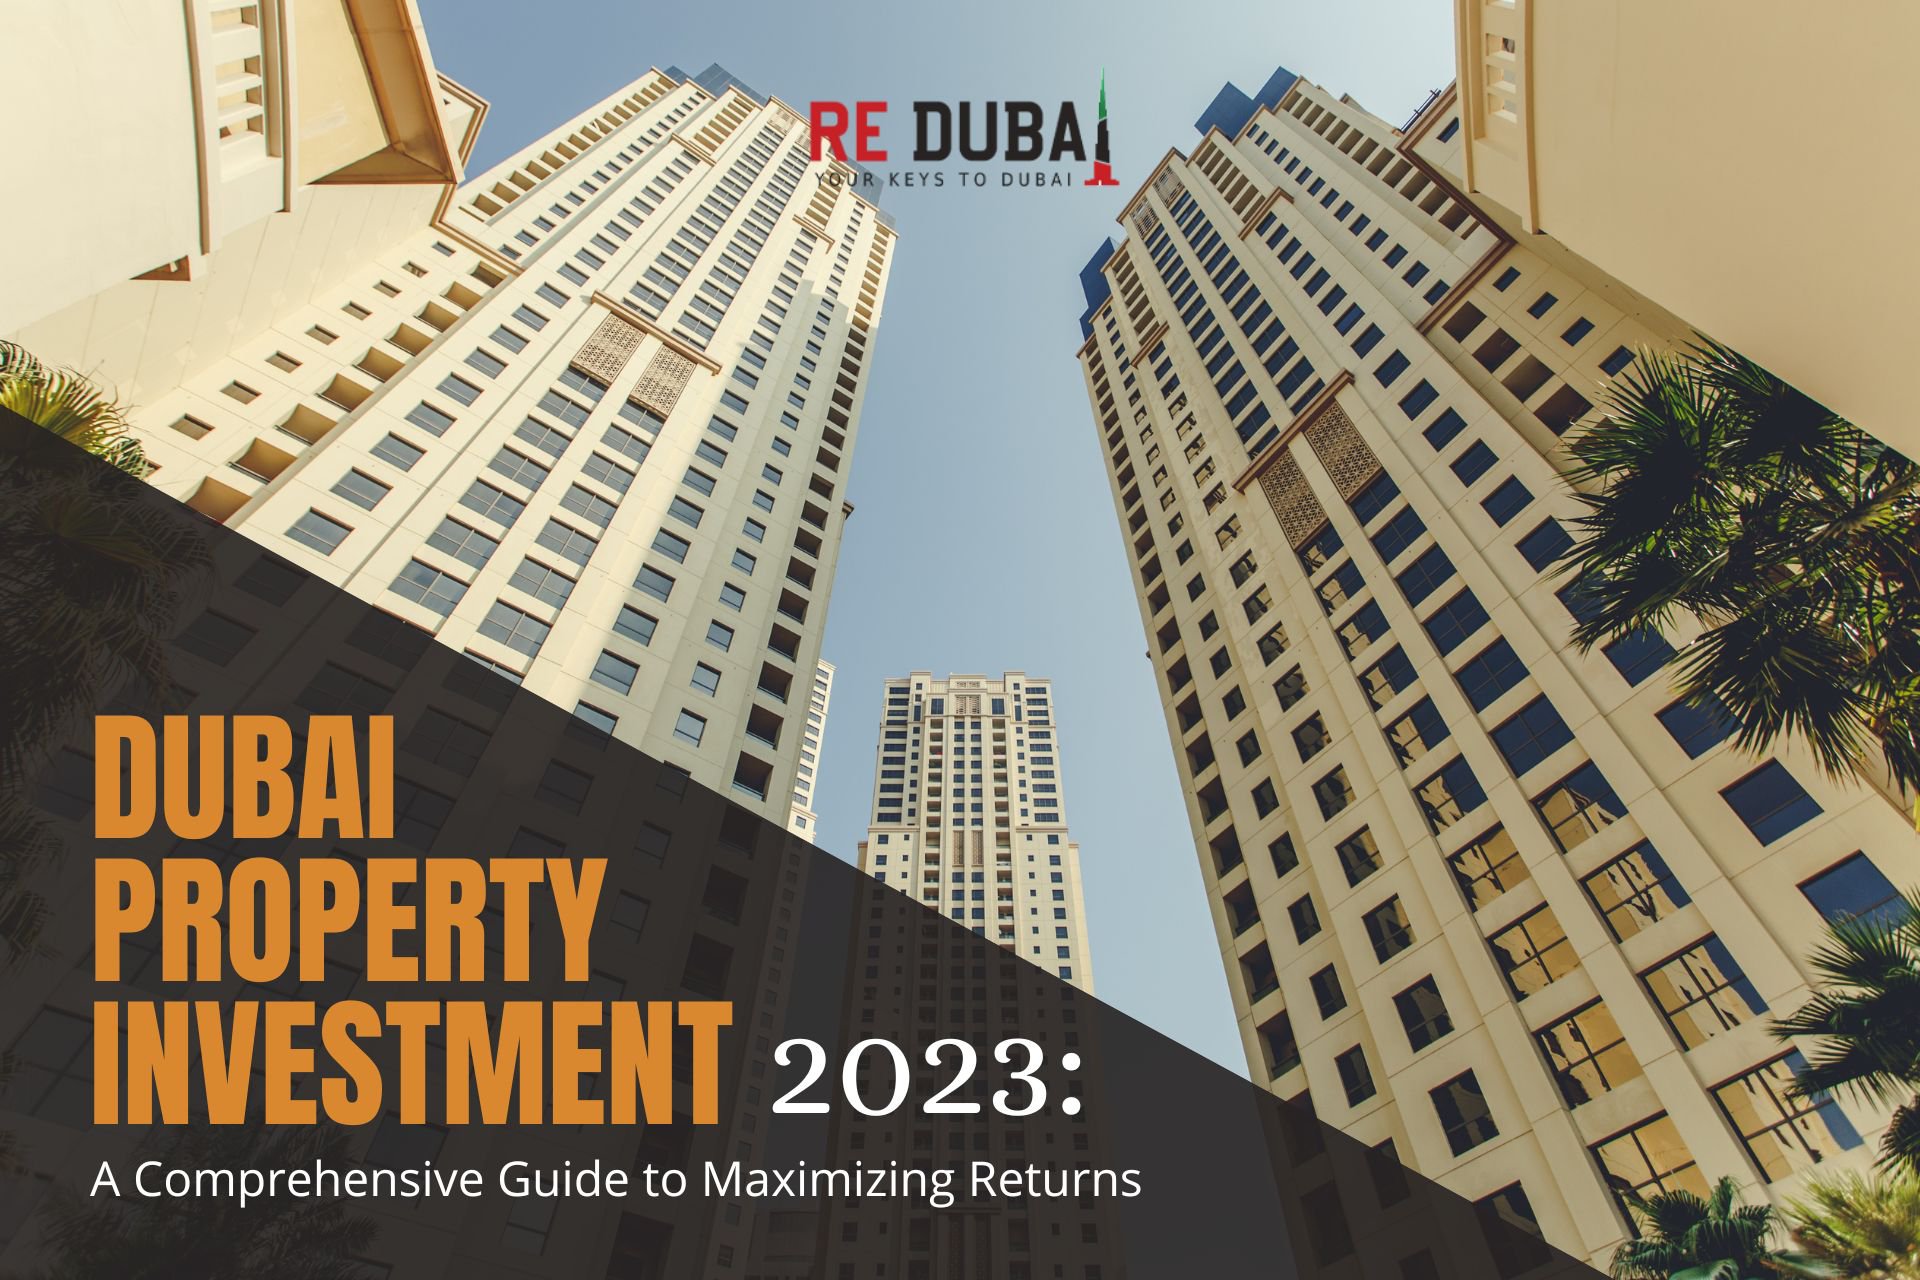 Dubai Property Investment 2023: A Comprehensive Guide to Maximizing Returns